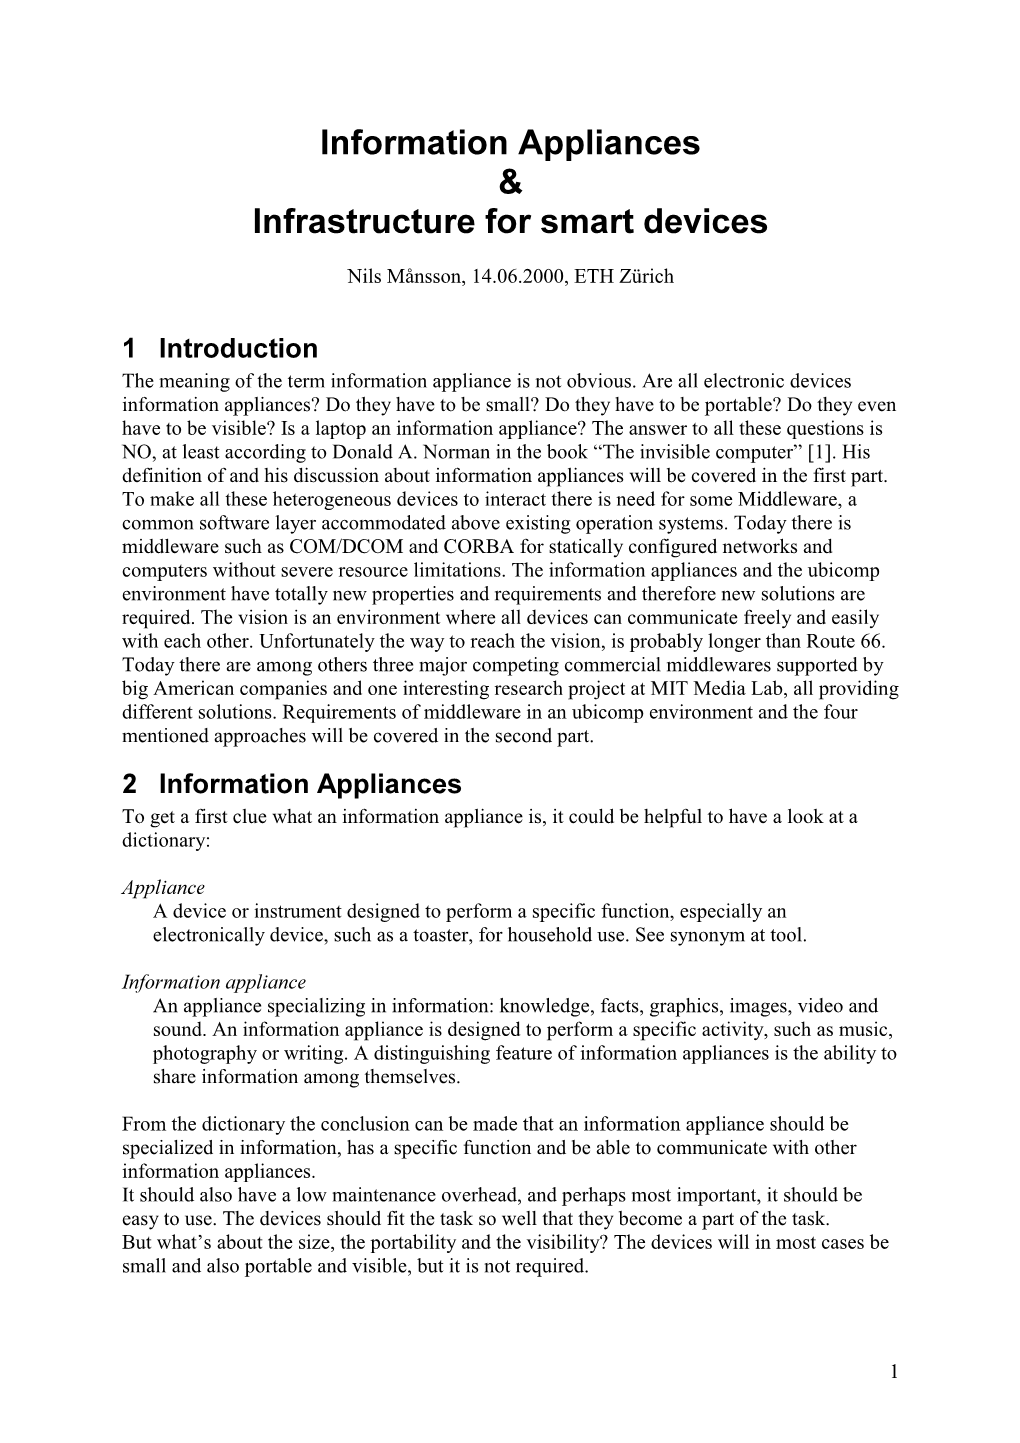 Information Appliances & Infrastructure for Smart Devices